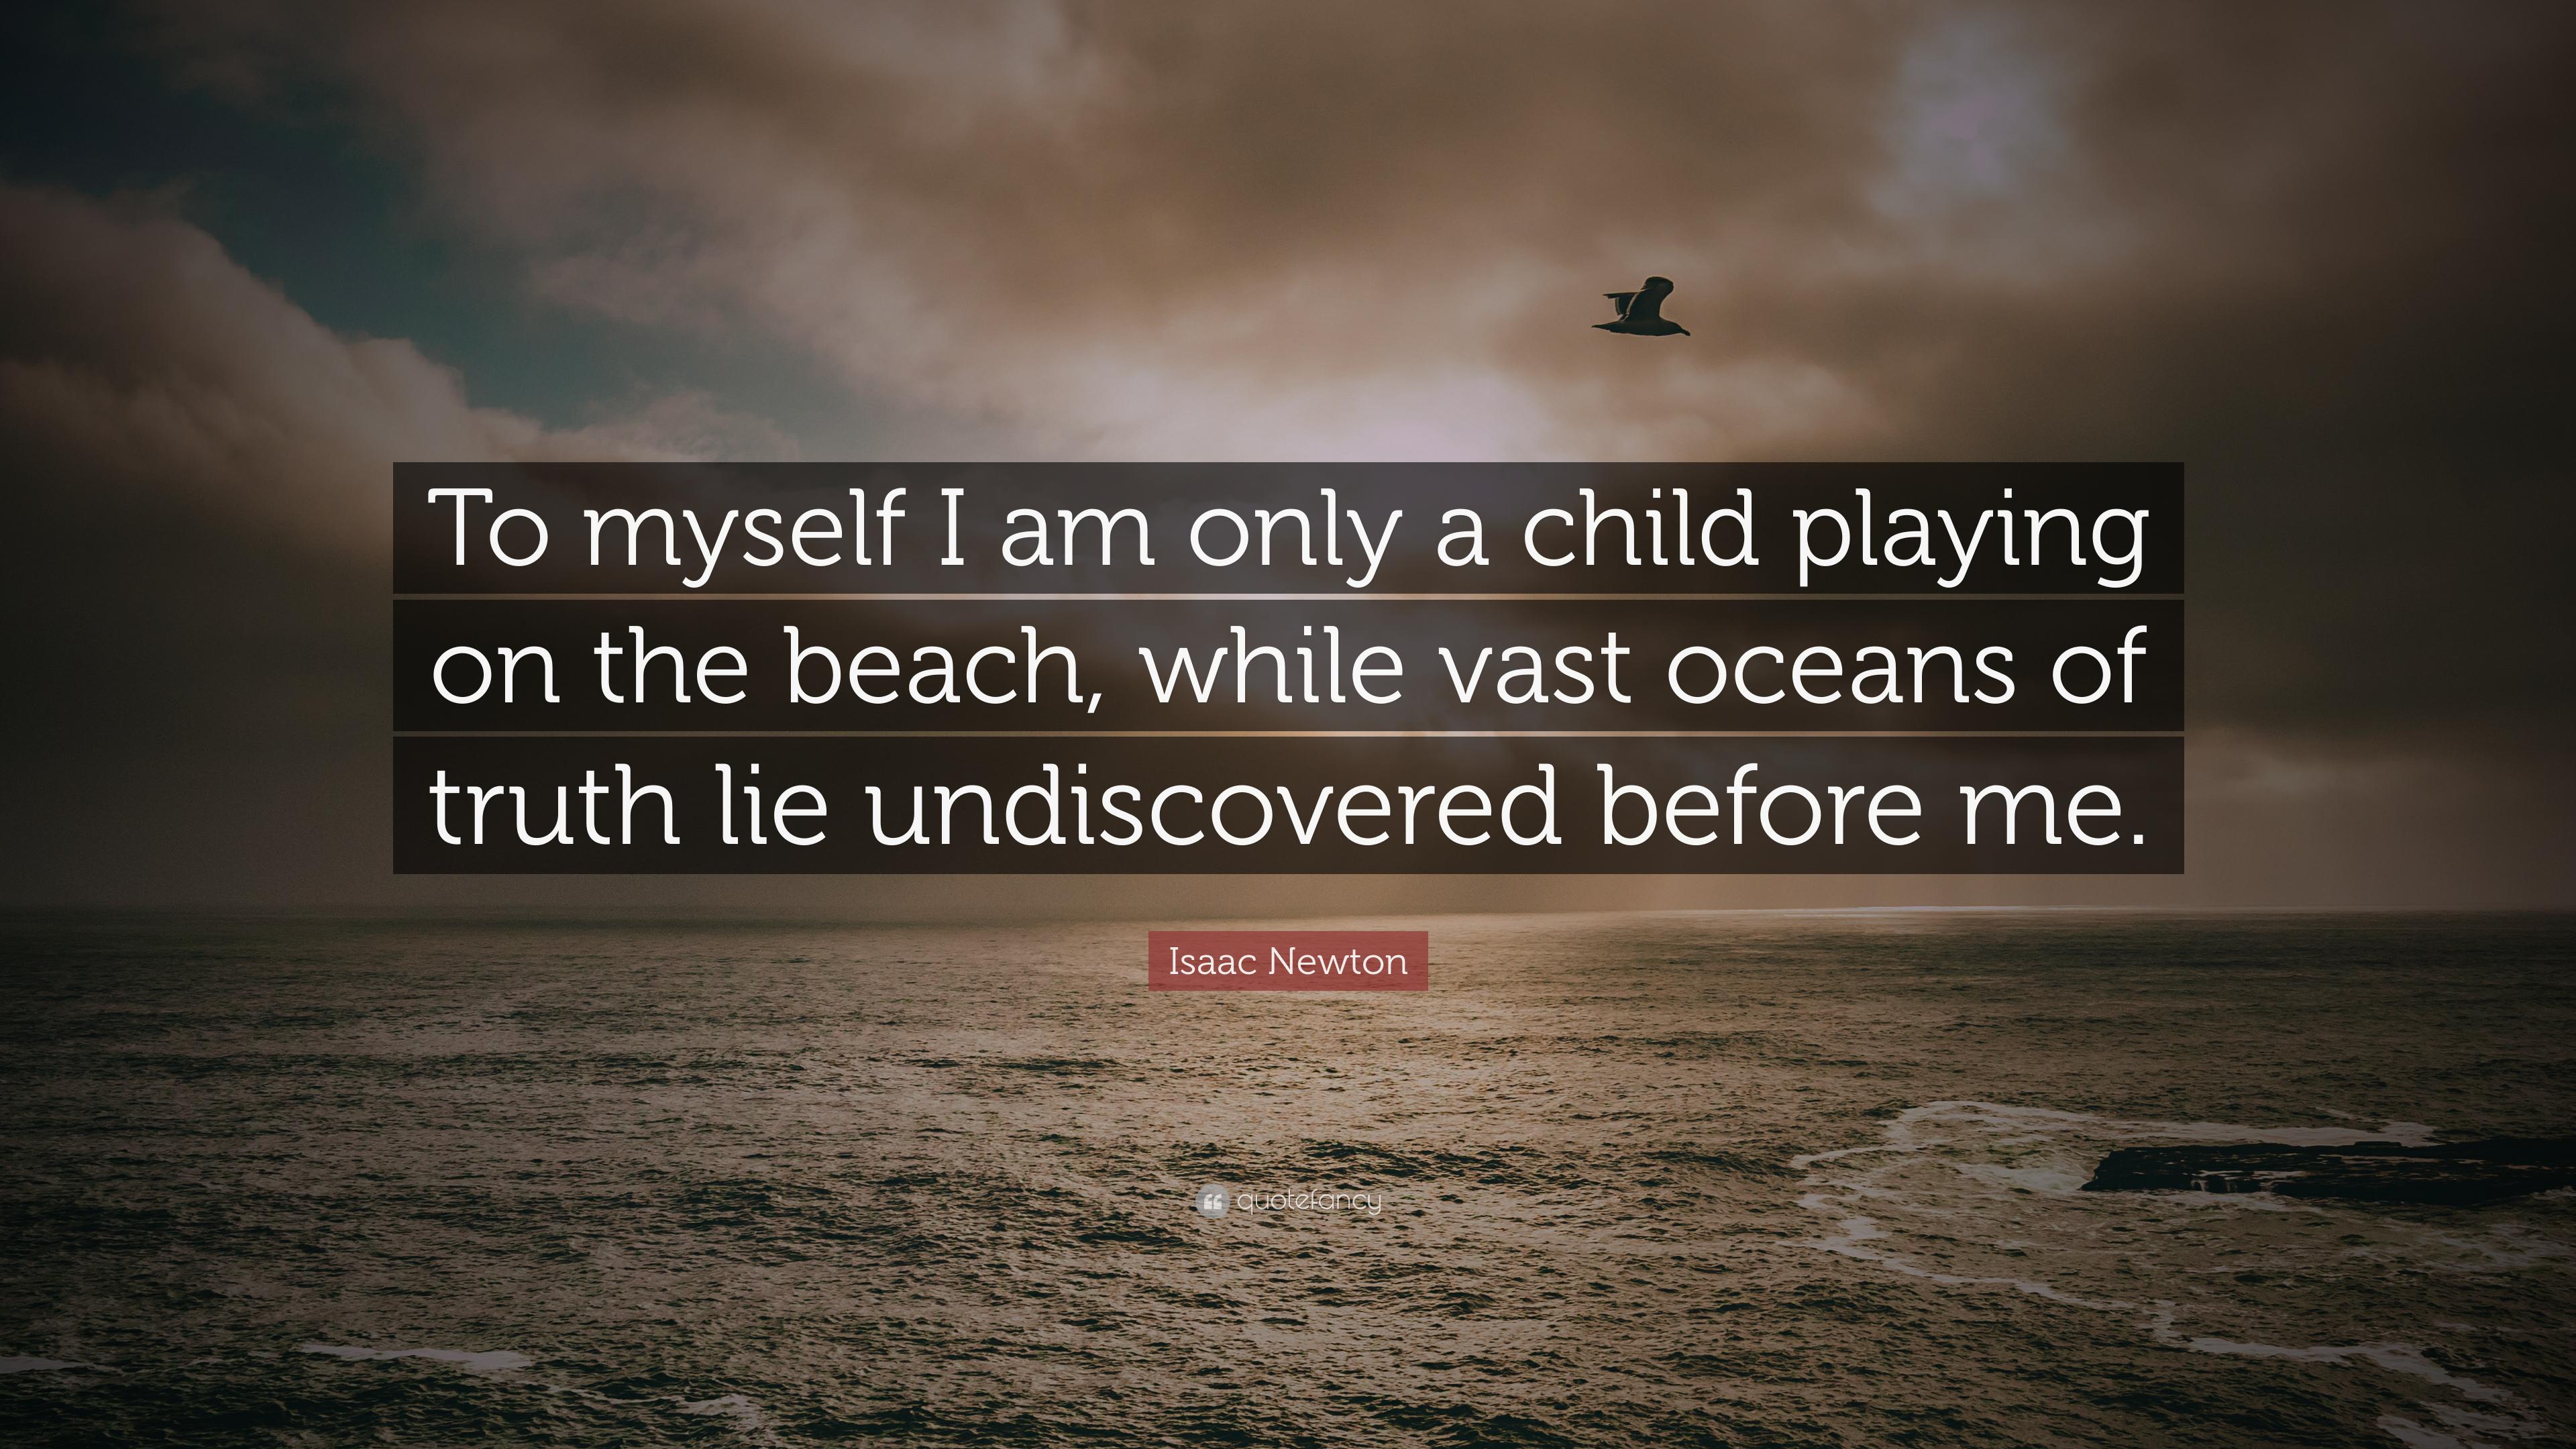 Isaac Newton Quote: “To myself I am only a child playing on